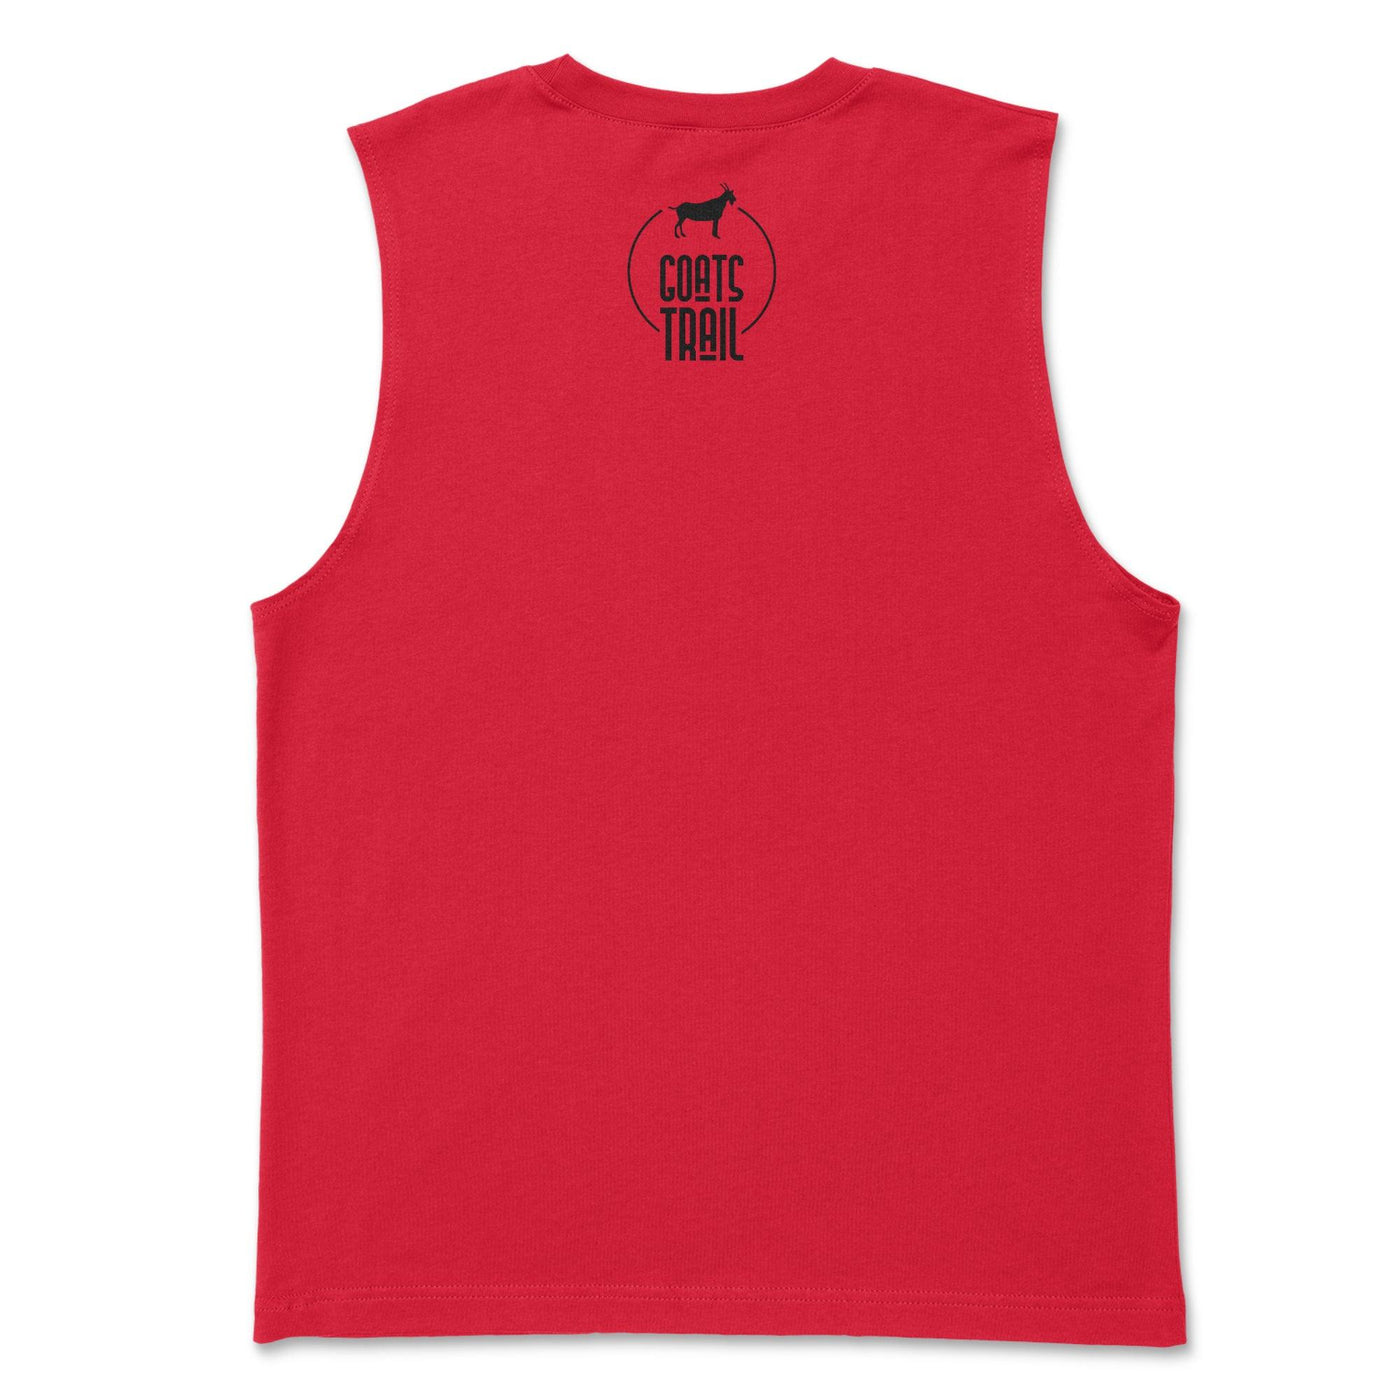 Cruisin' Down a Back Road Muscle Tank Top - Goats Trail